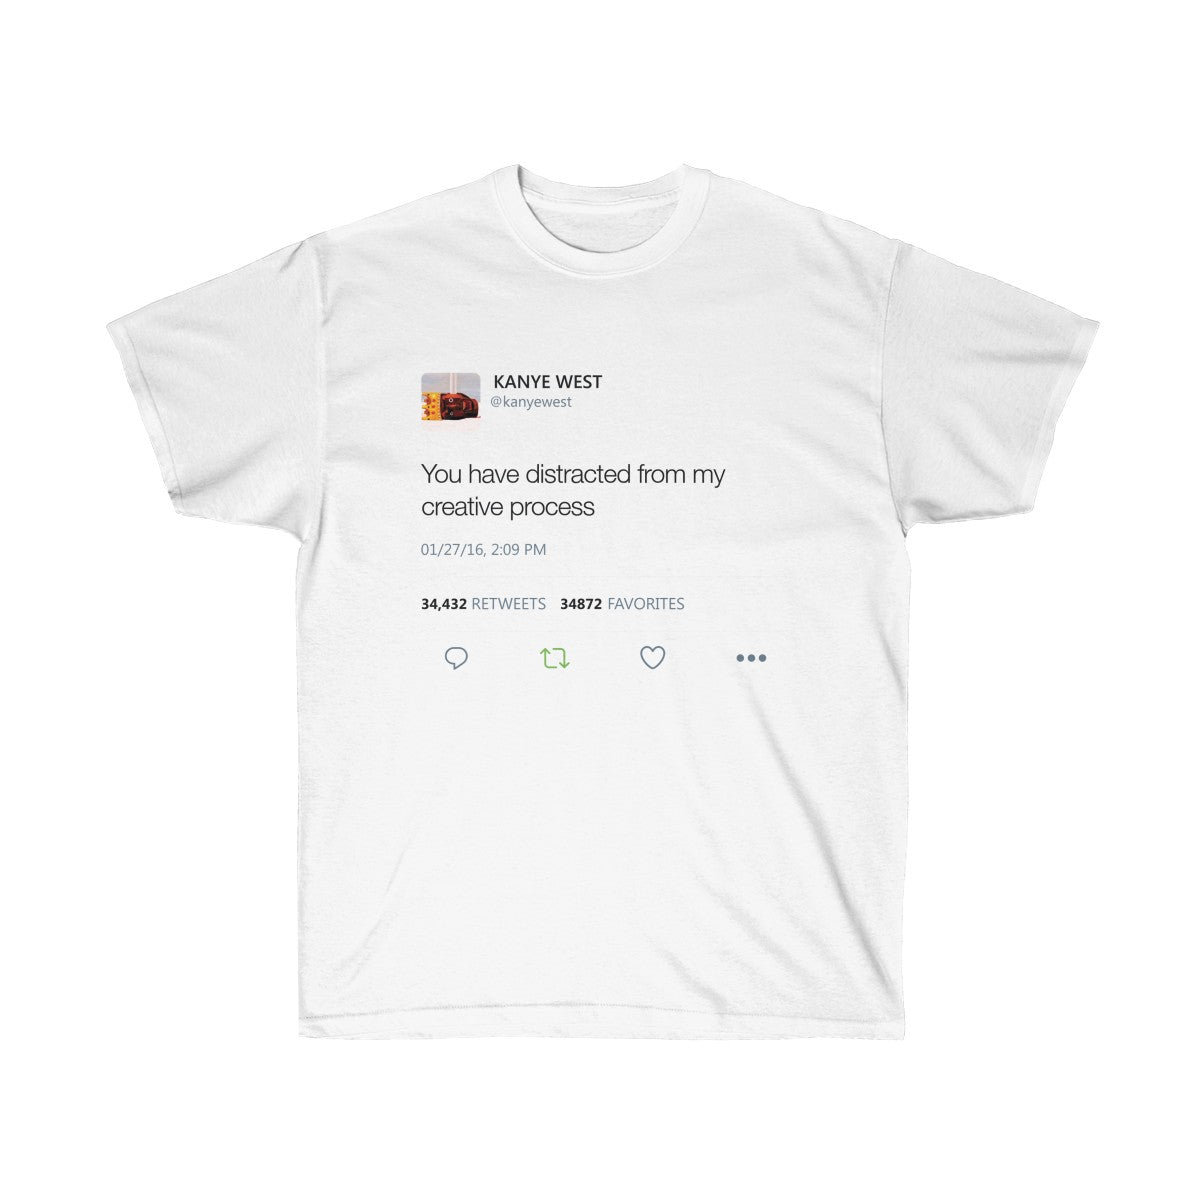 You have distracted from my creative process - Kanye West Tweet T-Shirt-White-L-Archethype